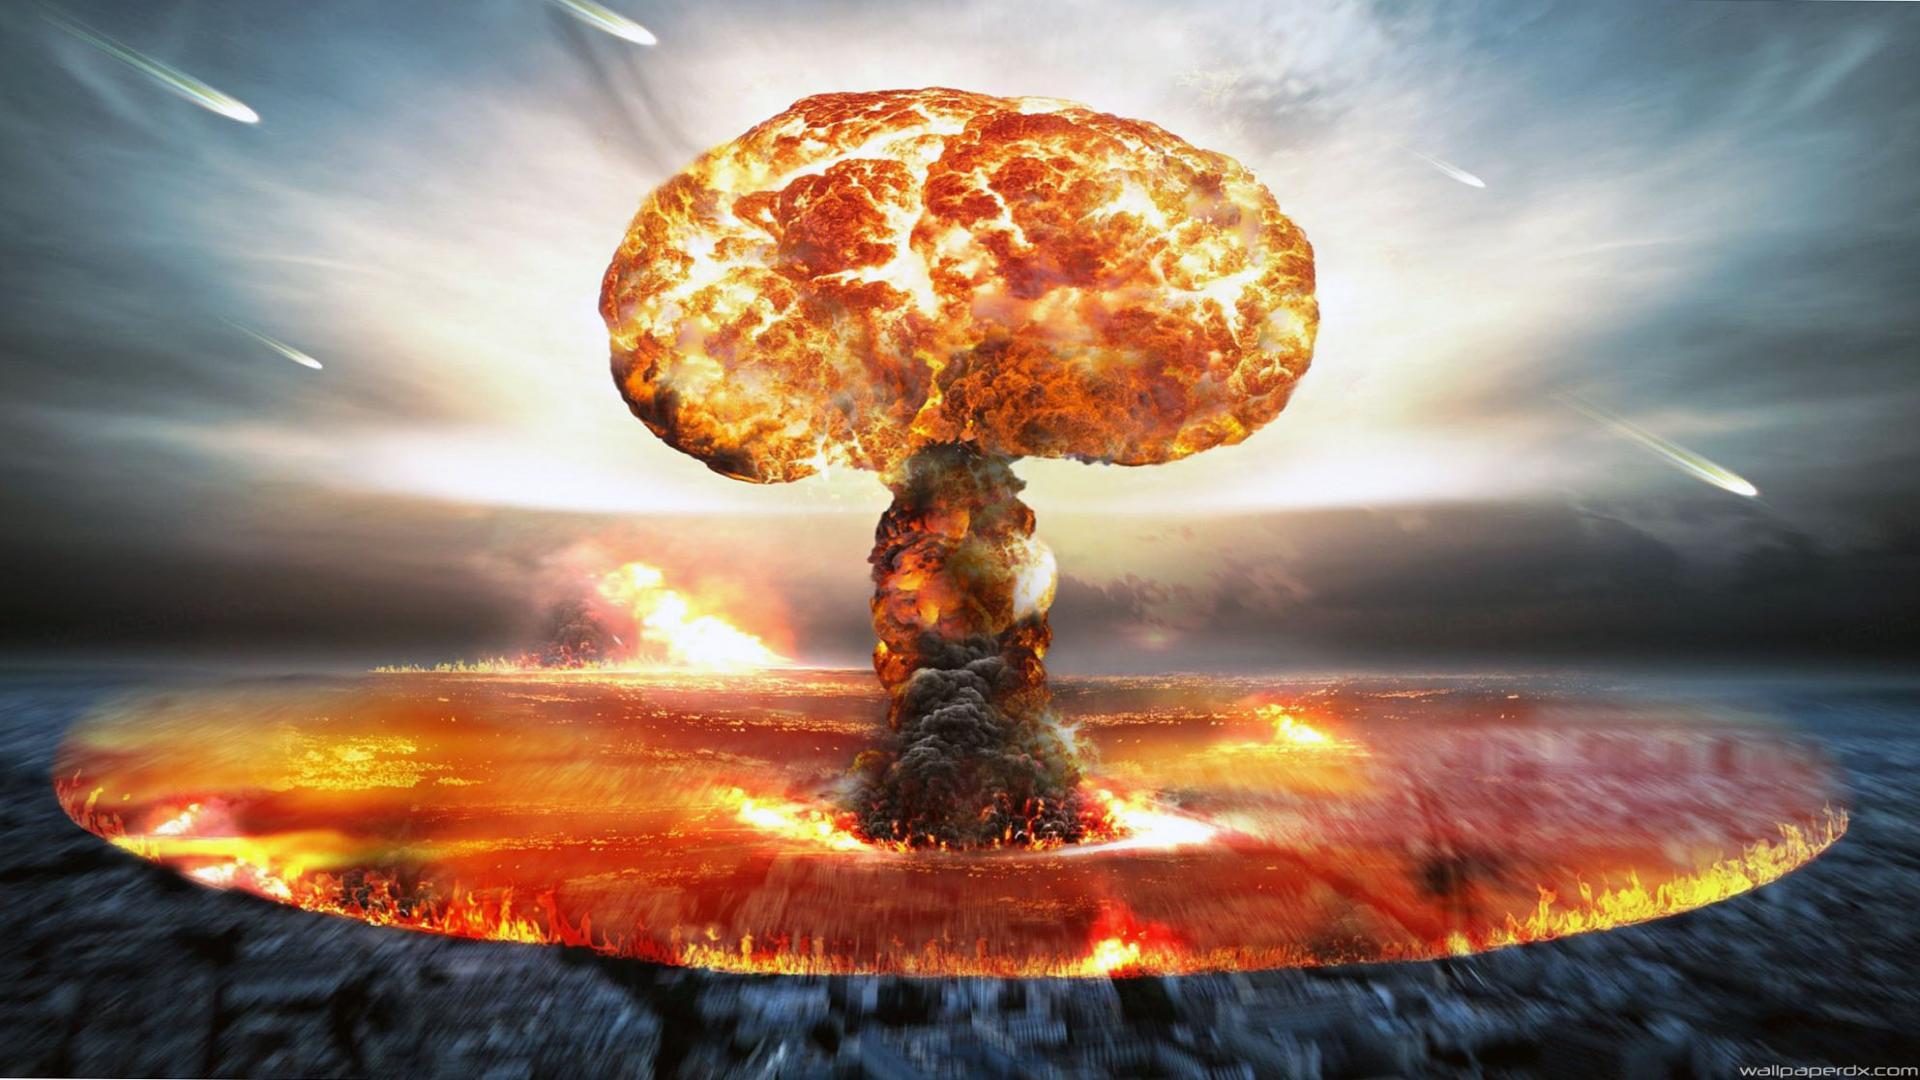 nuclear explosion wallpaper hd